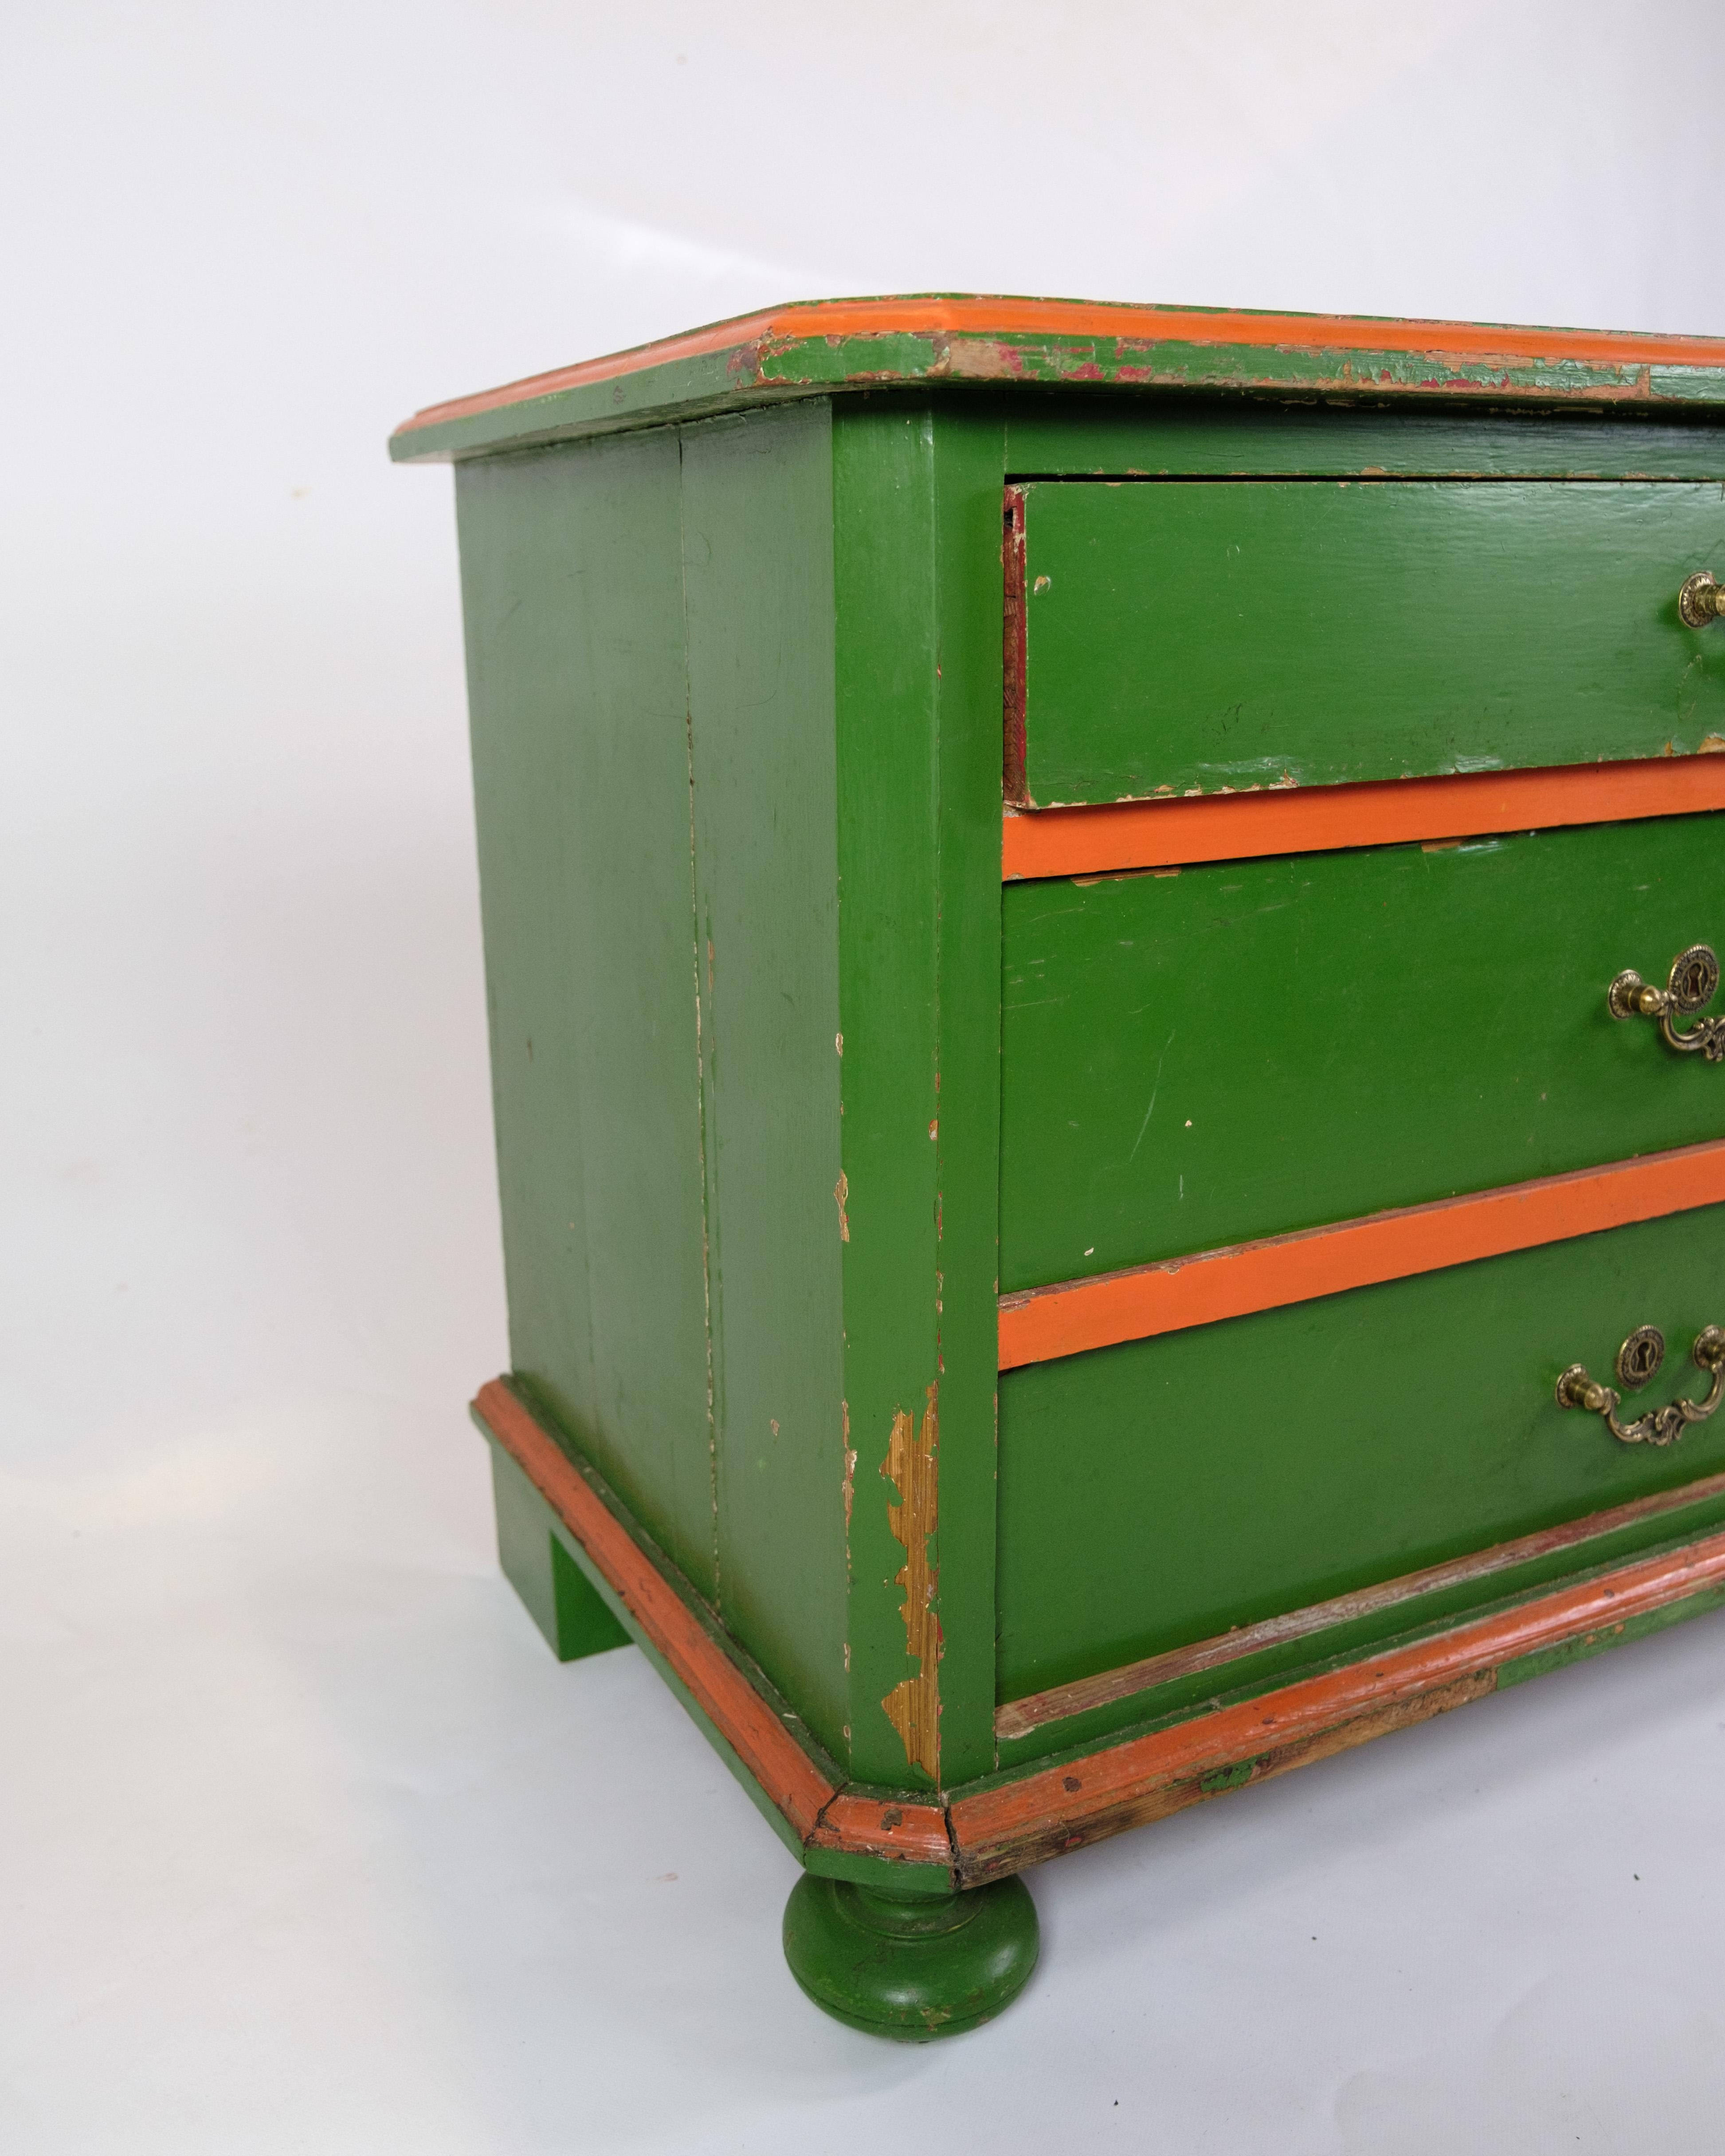 Danish Small Antique Chest Of Drawers Painted In Green With Red Edges From 1890s For Sale